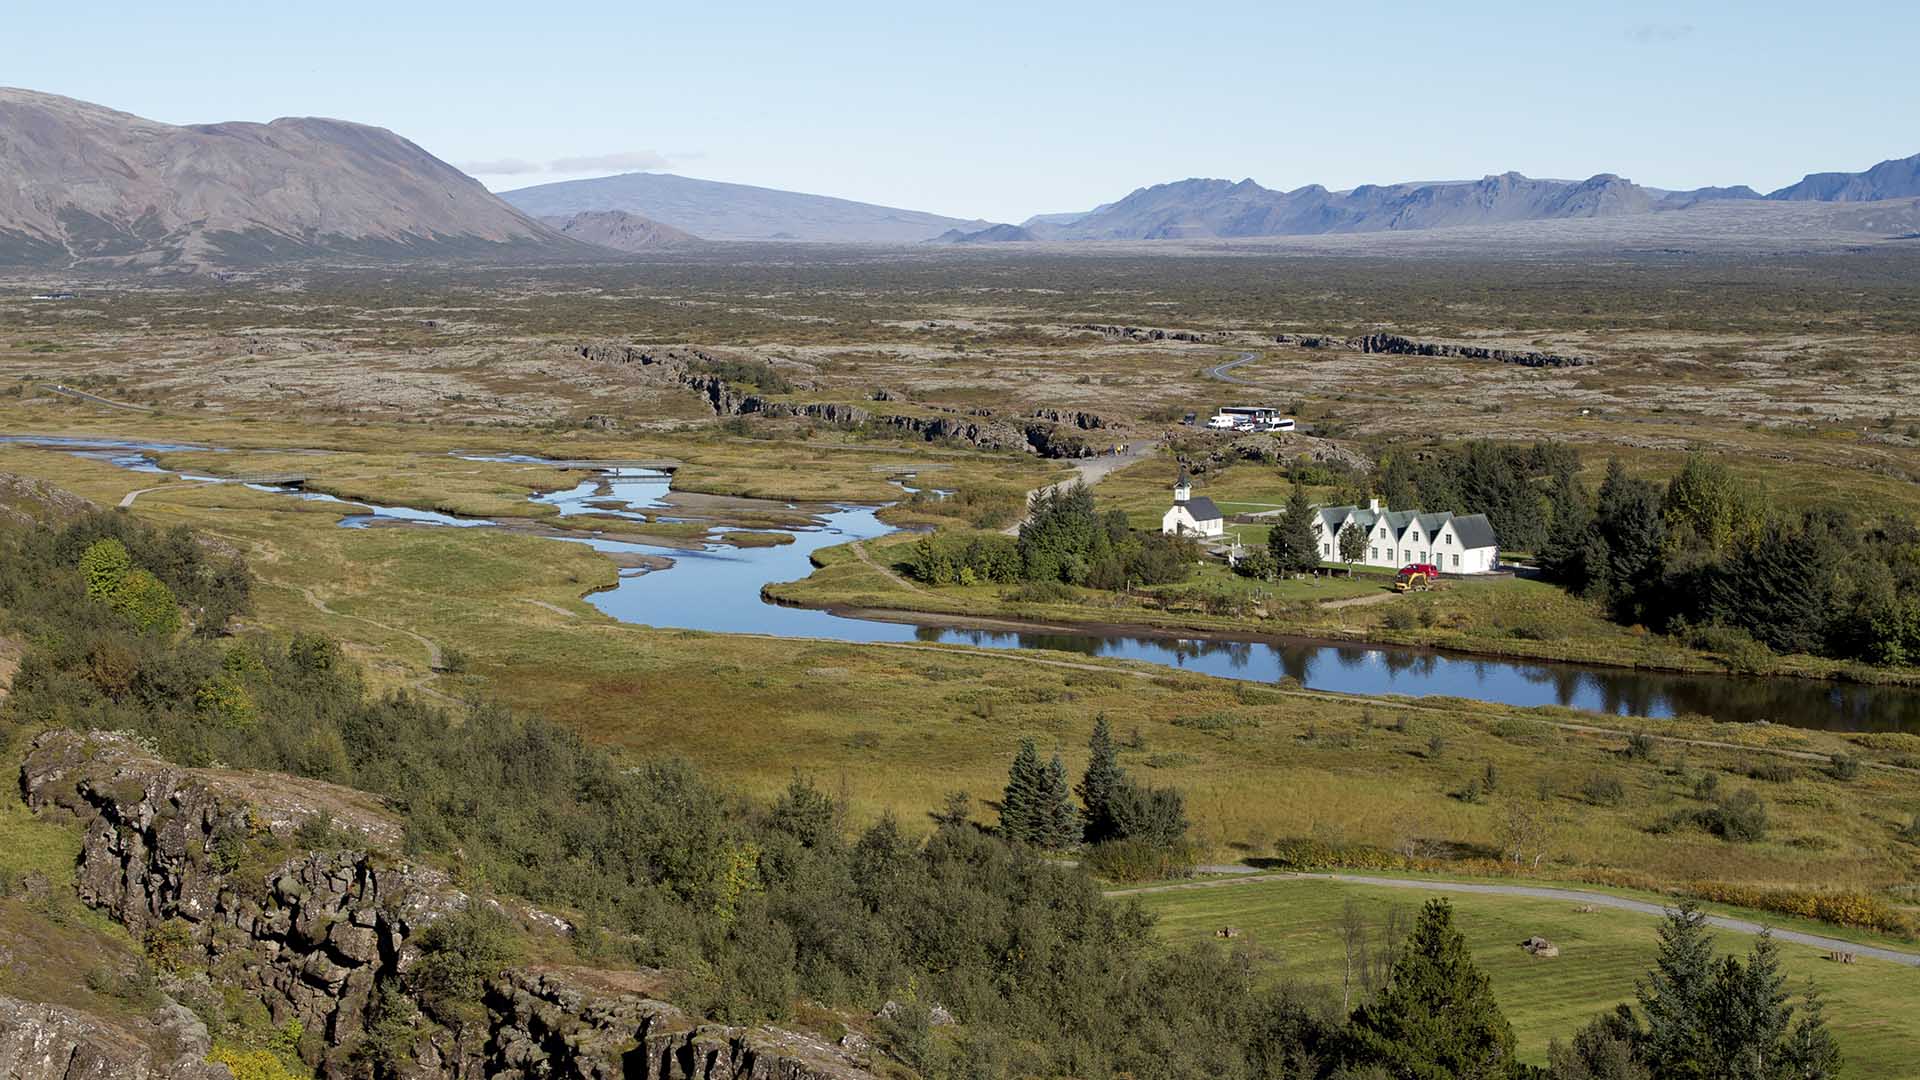 Thingvellir National Park is the most important historical place in Iceland